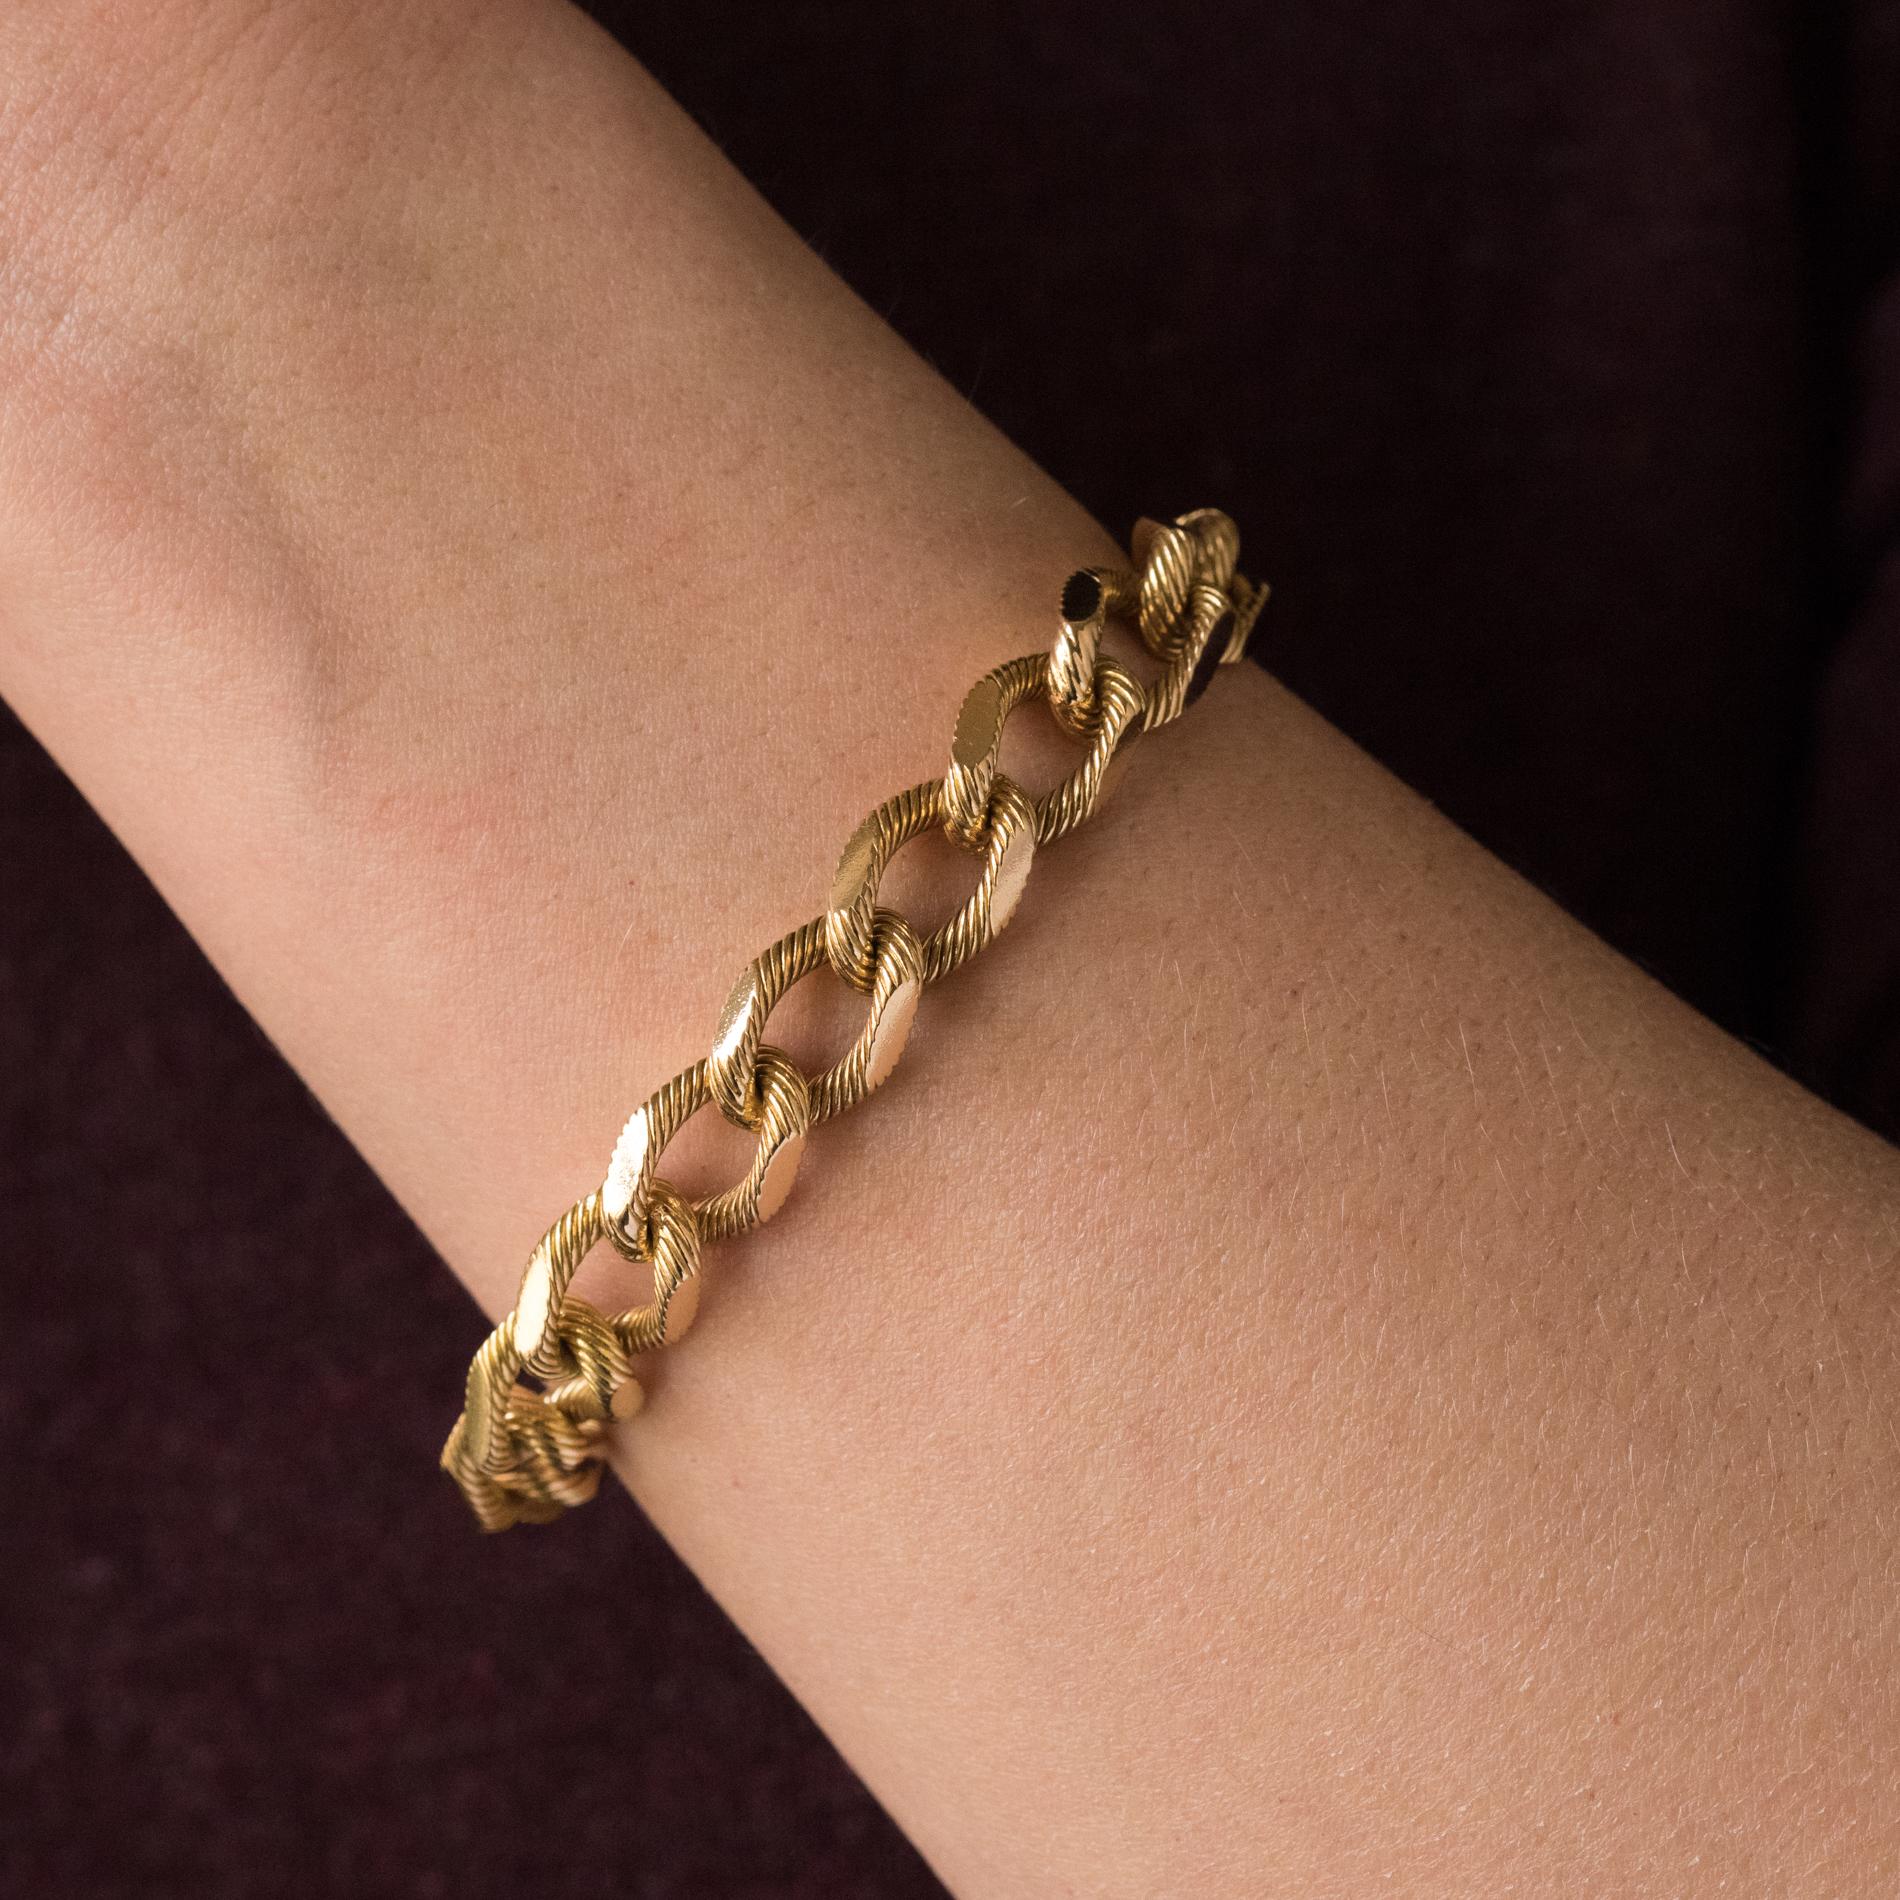 Bracelet in 18 karats yellow gold, rhinoceros hallmark.
Massive retro bracelet, it consists of a textured gourmette mesh. The clasp is a ratchet with a safety 